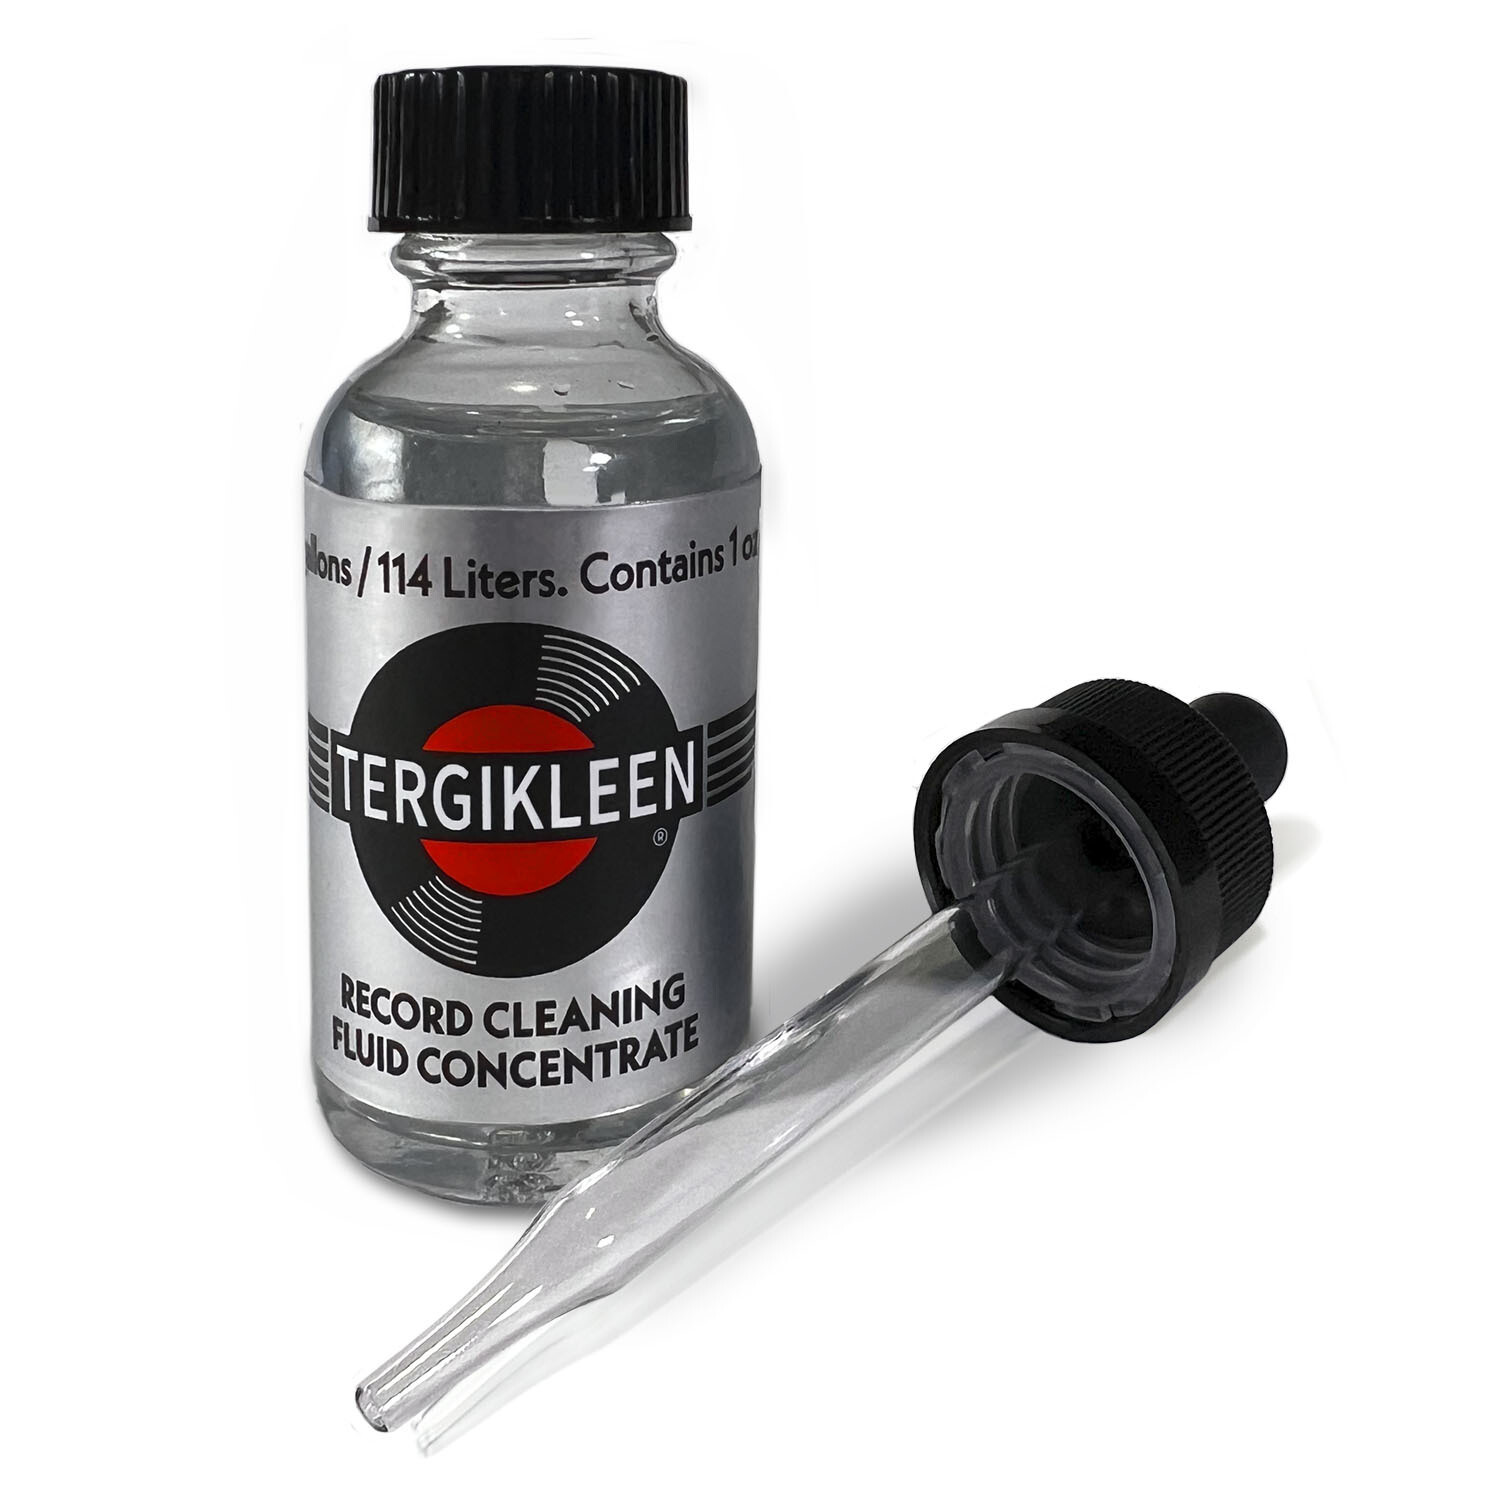 TergiKleen Record Cleaning Fluid Concentrate